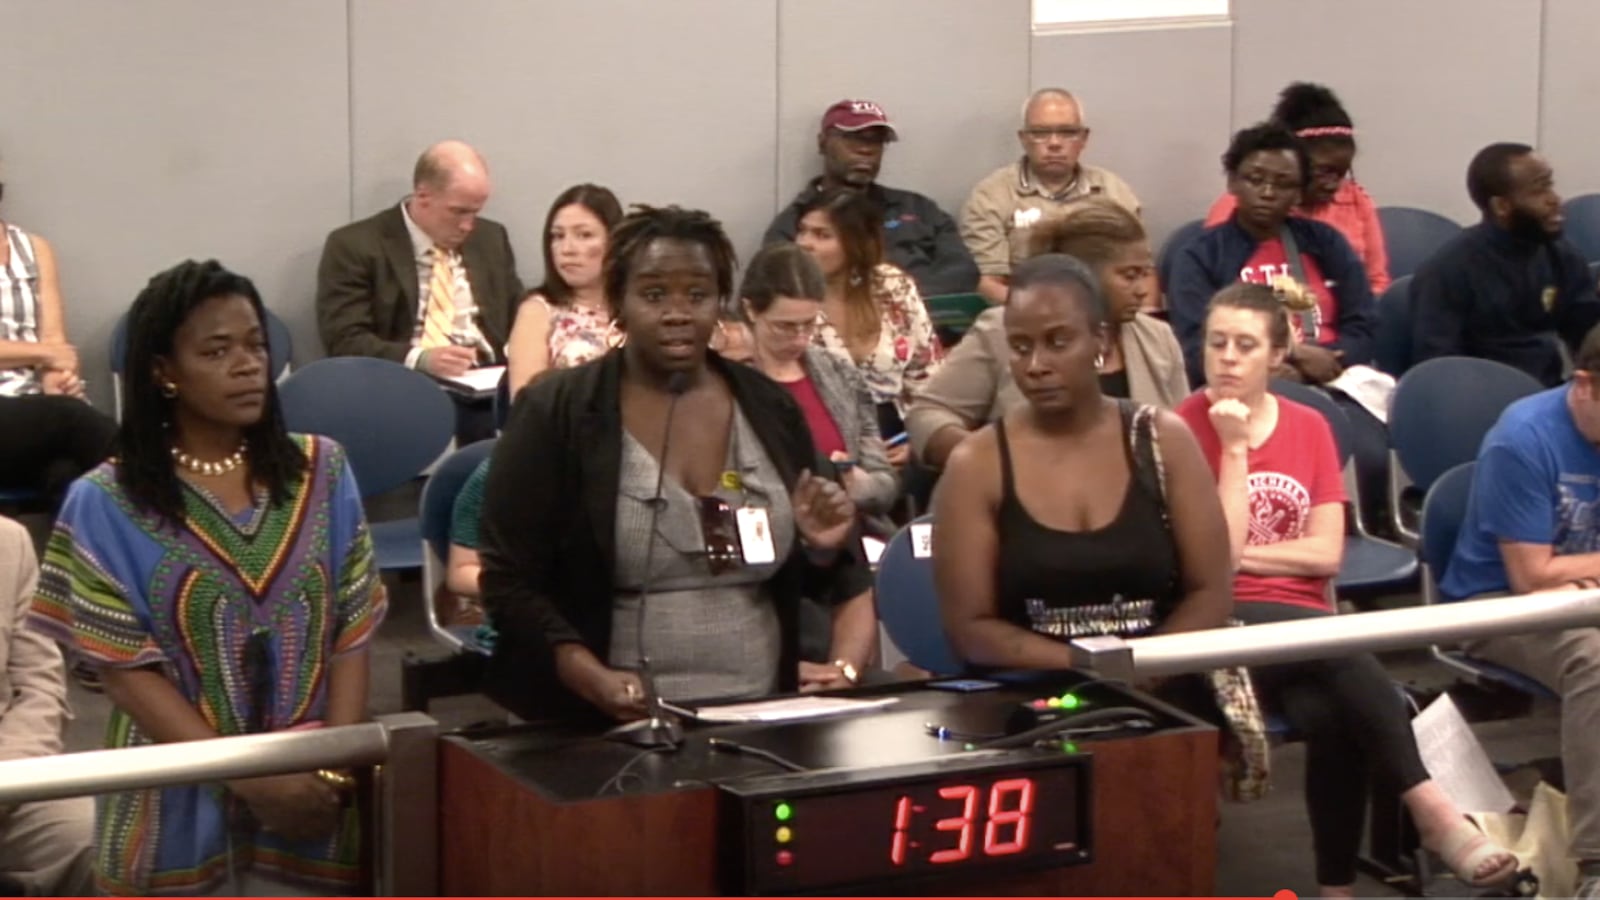 As the two-minute timer on the podium counts down, a  group of parents from Oglesby Elementary School lobby the new Chicago Board of Education in June for more support of their Montessori program.